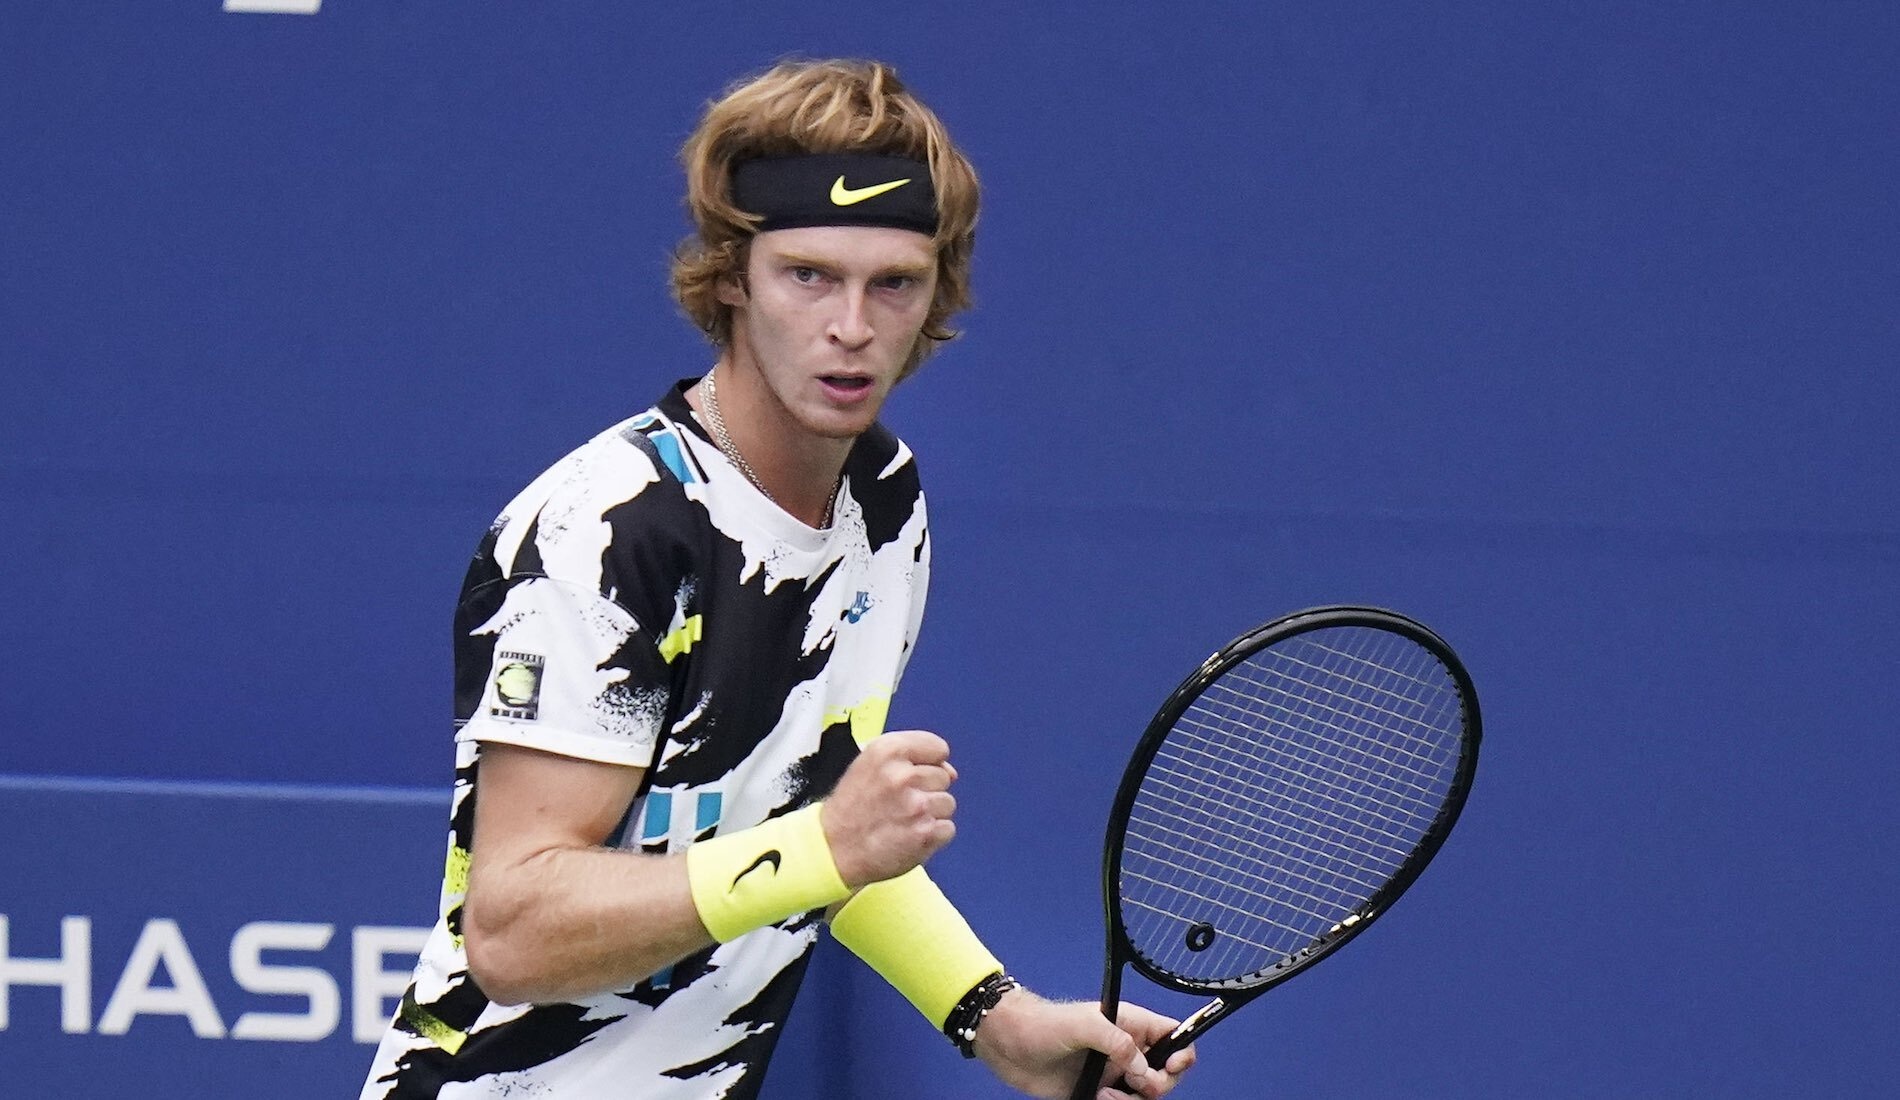 Andrey Rublev at US Open against Matteo Berrettini